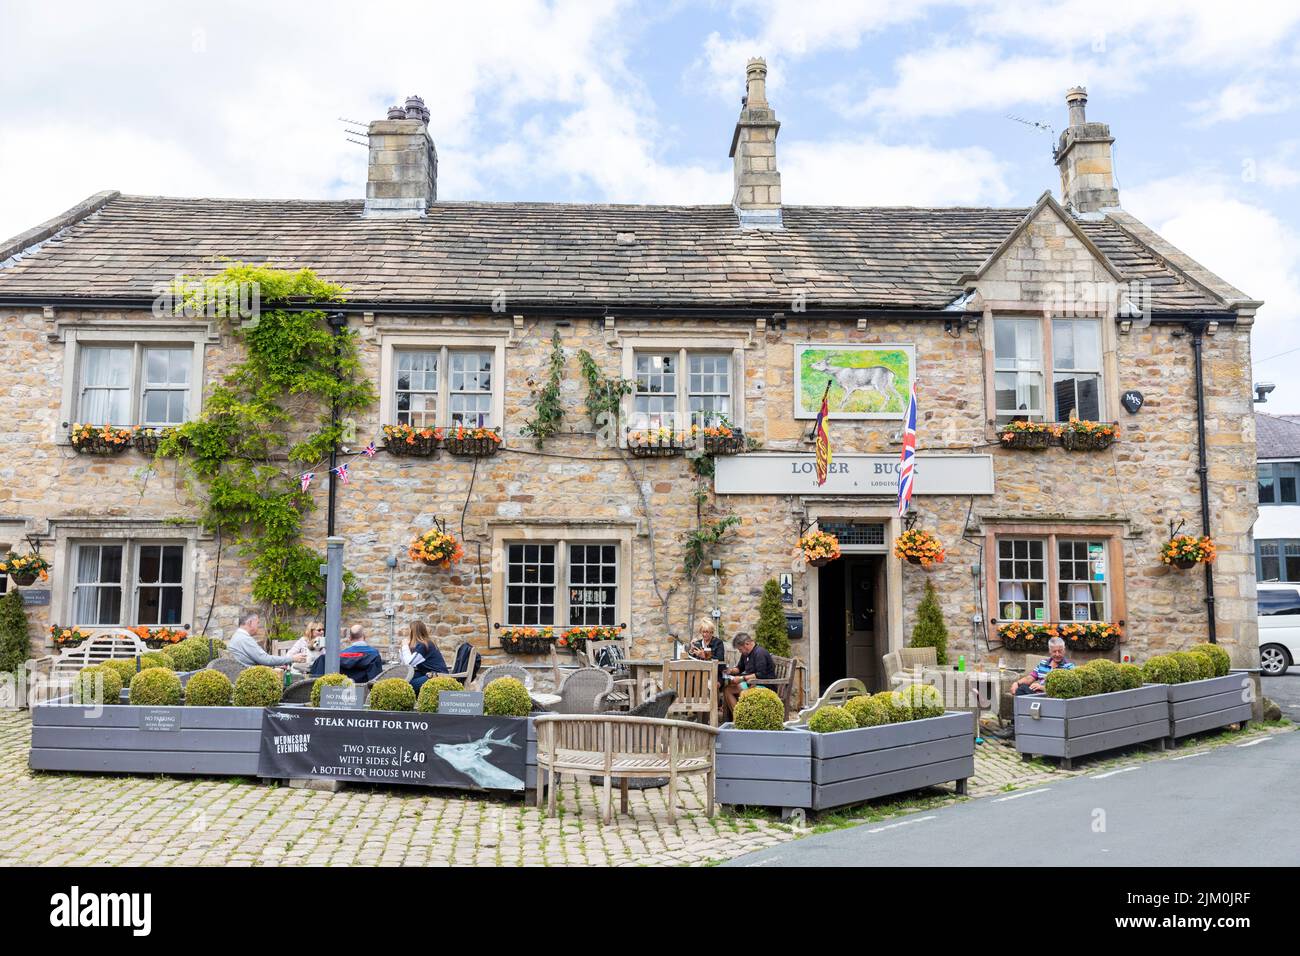 Waddington village in Lancashire , Lower Buck Inn public house pub, on a summers day in 2022, England,UK customers eating drinking outside Stock Photo